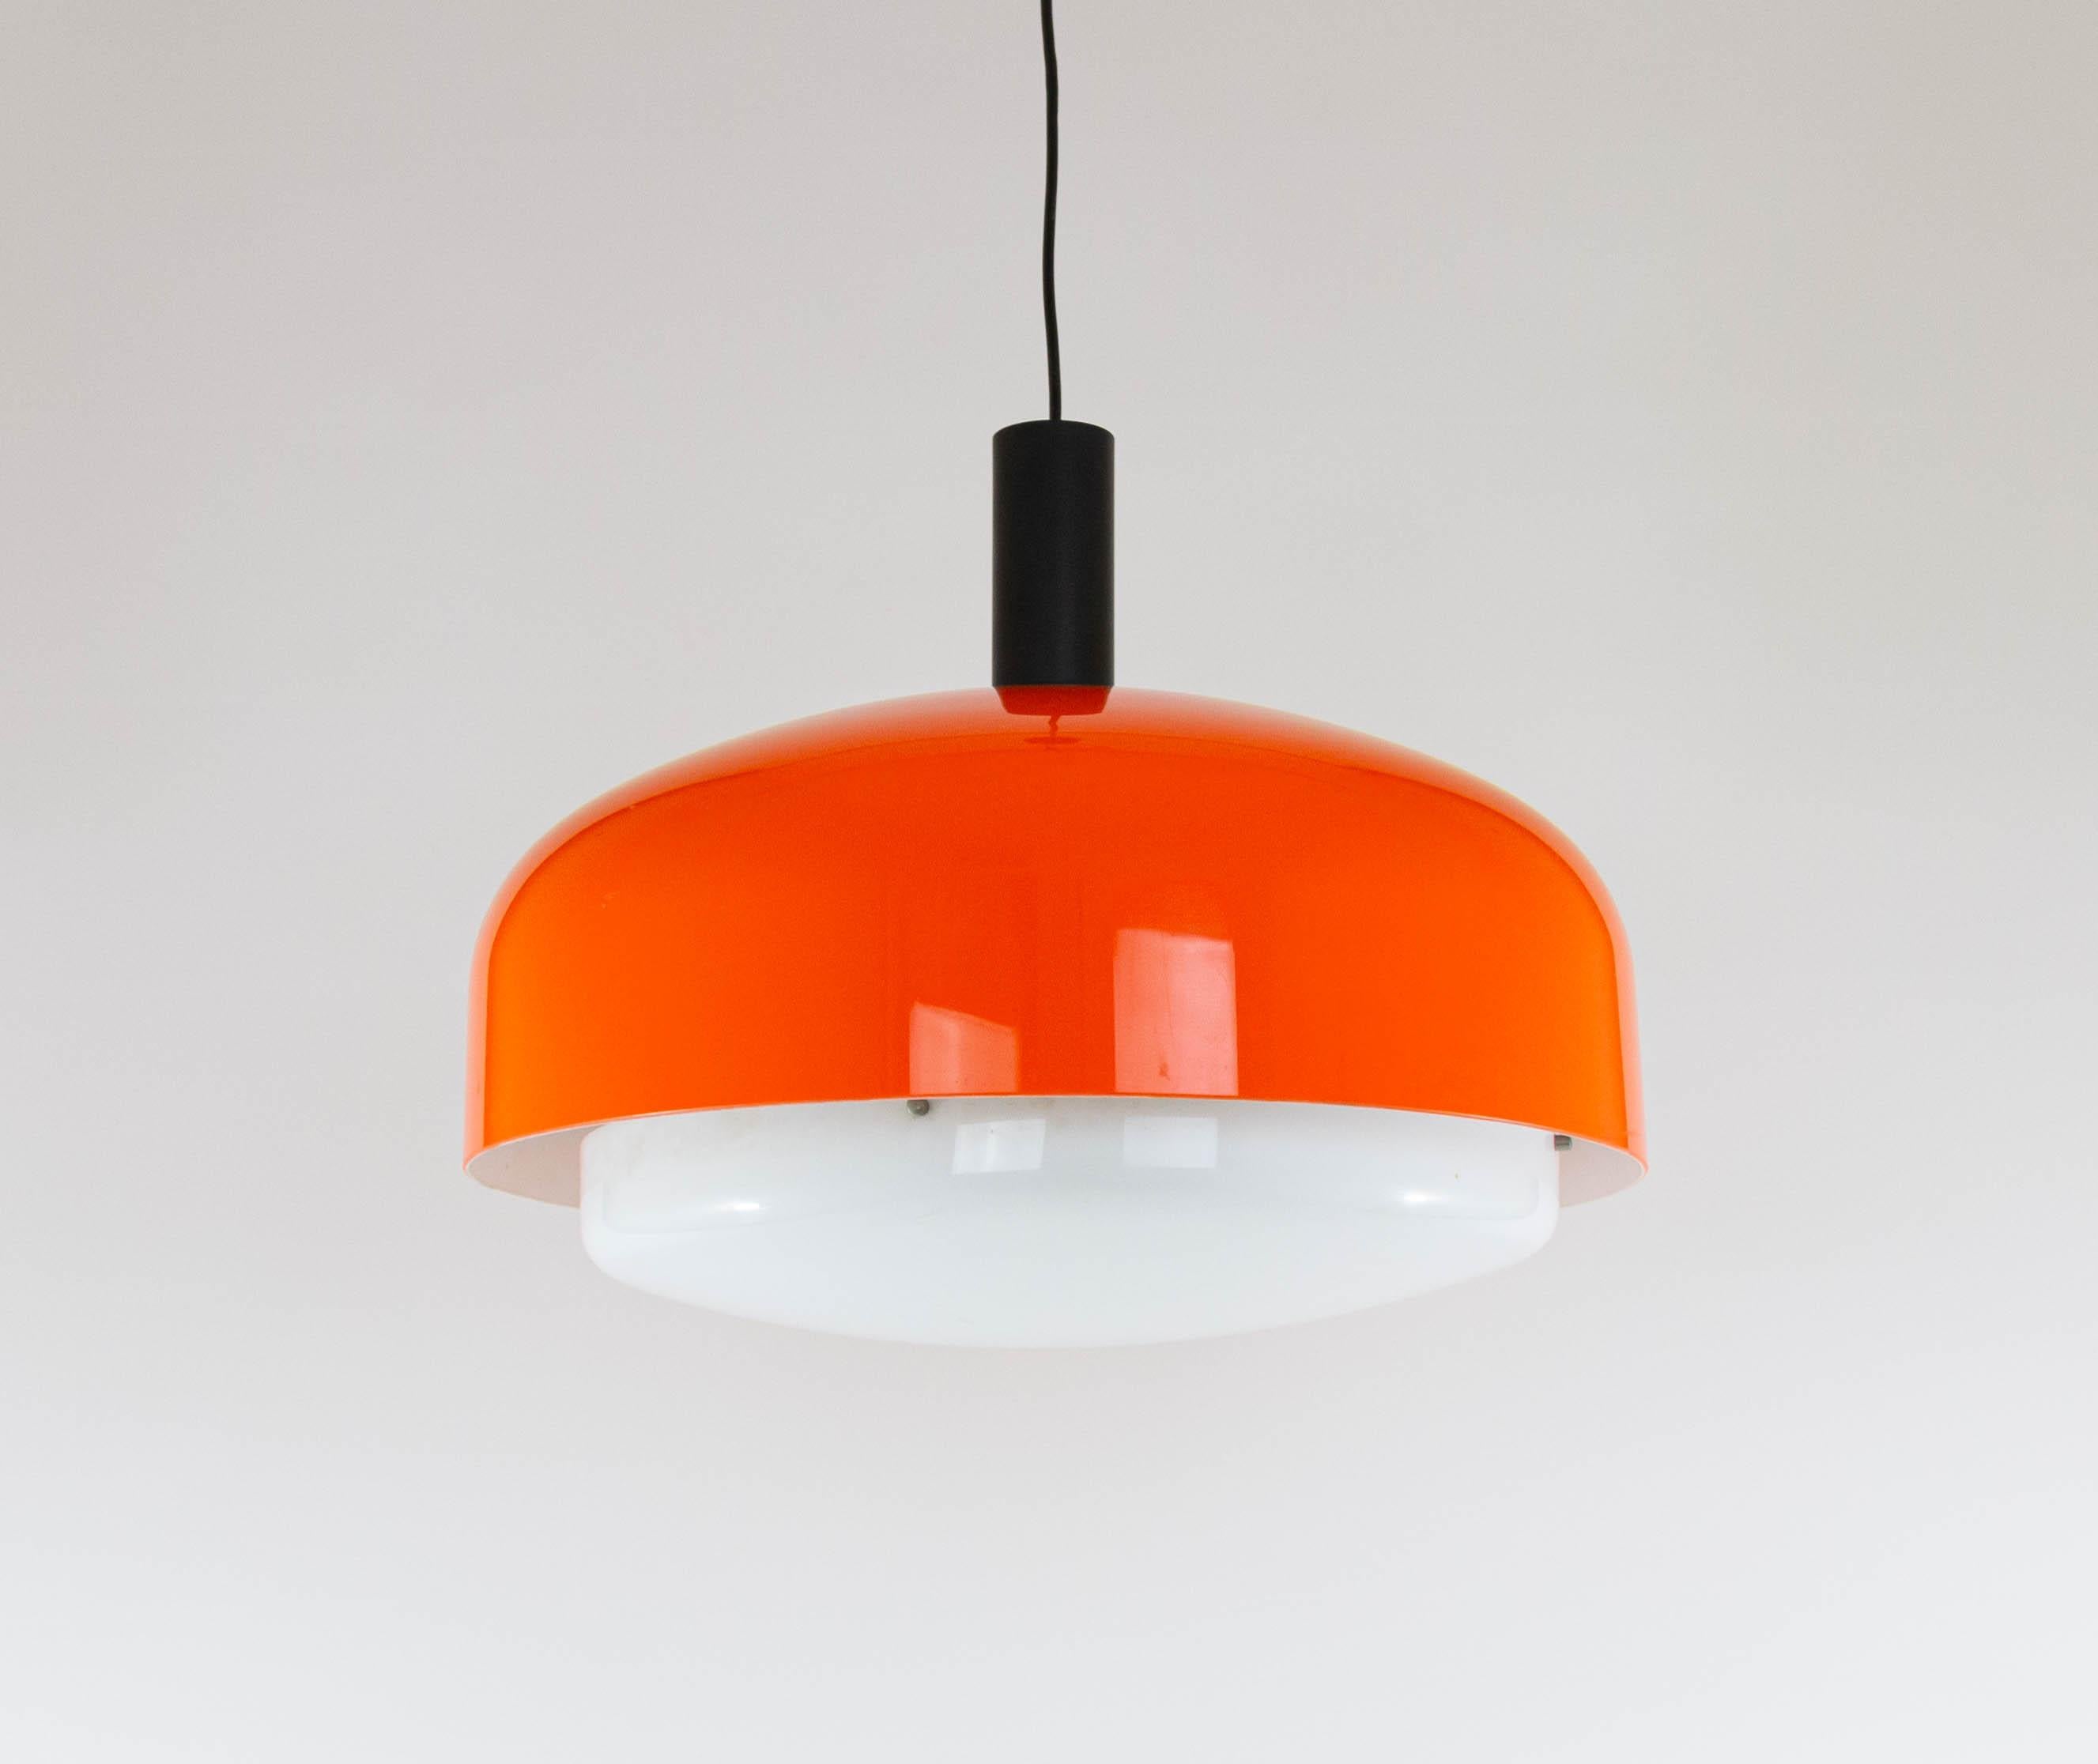 Large KD62 pendant designed by Eugenio Gentili Tedeschi in 1962 and manufactured by Kartell.

The lamp consists of two plastic shades and is finished with metal details. It contains two fluorescent tubes which are included in the offer.